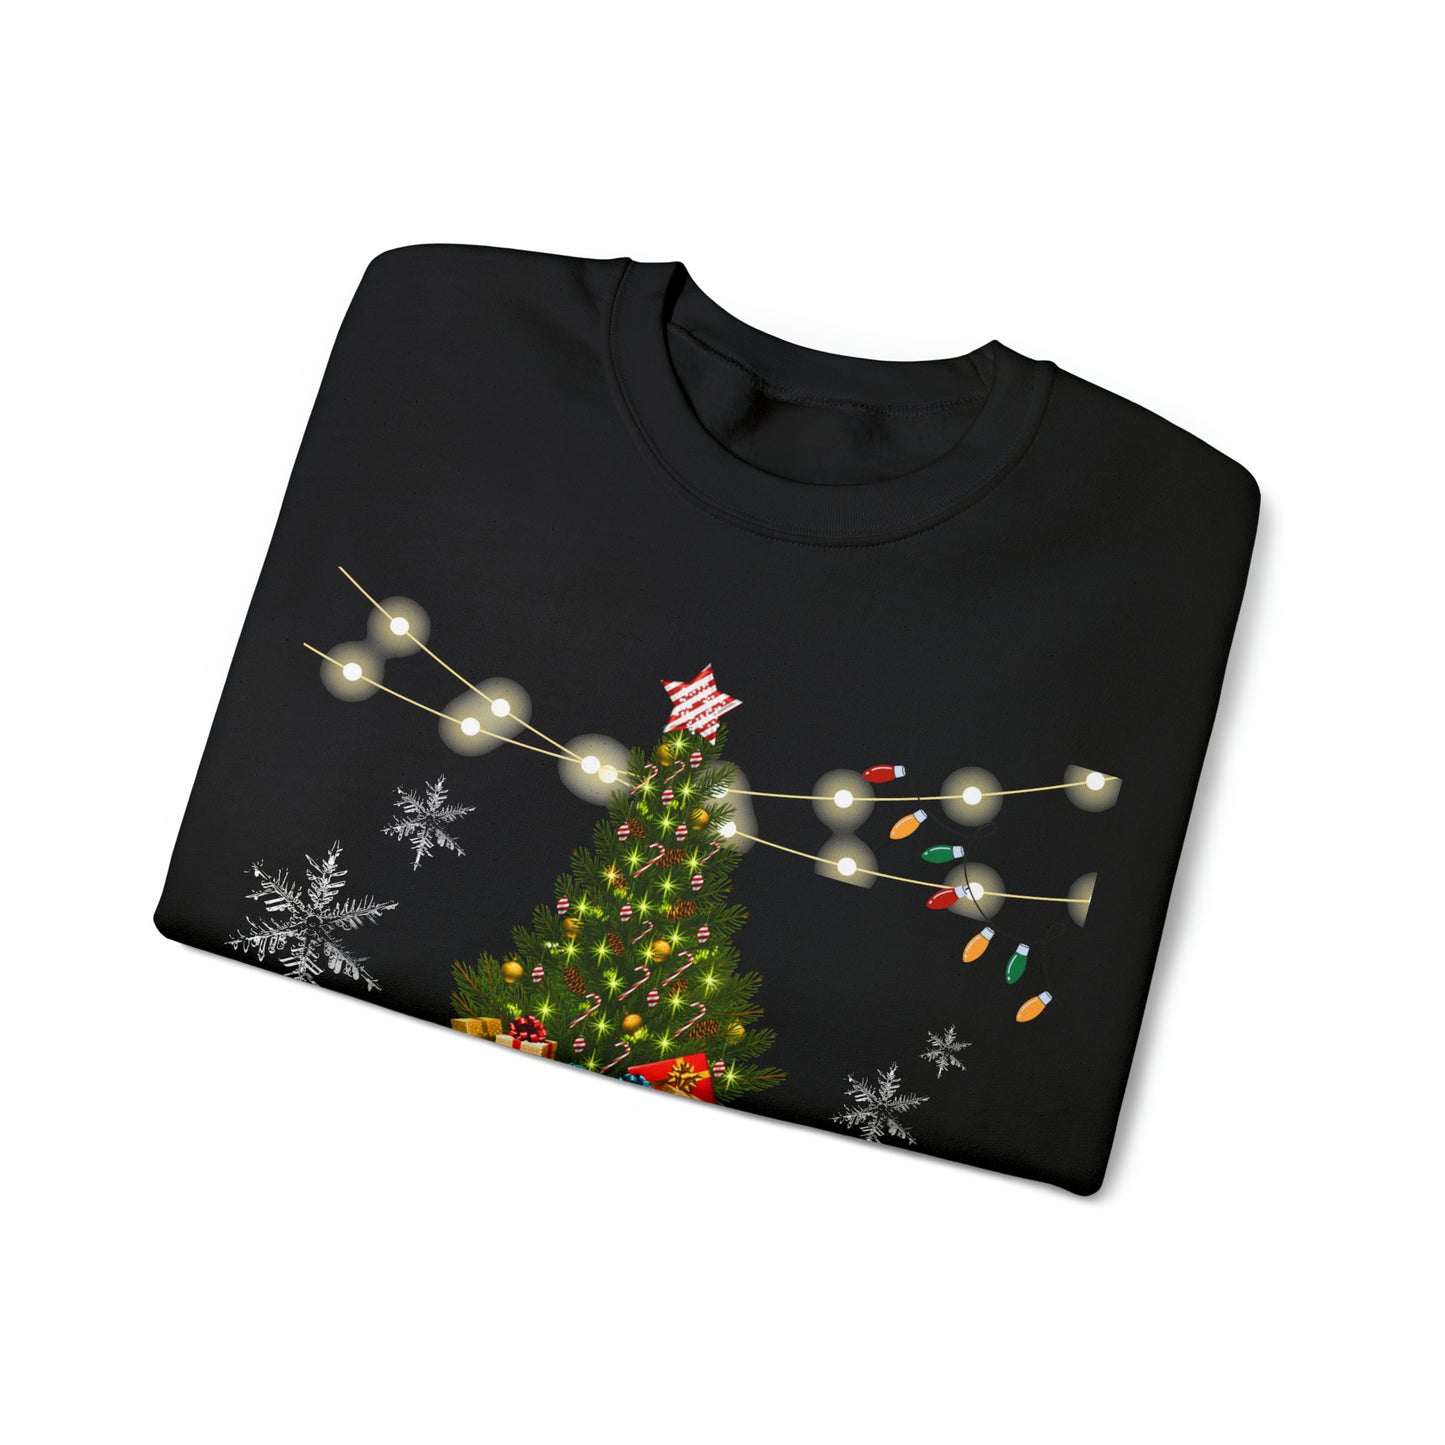 All booked for Christmas - Unisex Heavy Blend™ Crewneck Sweatshirt